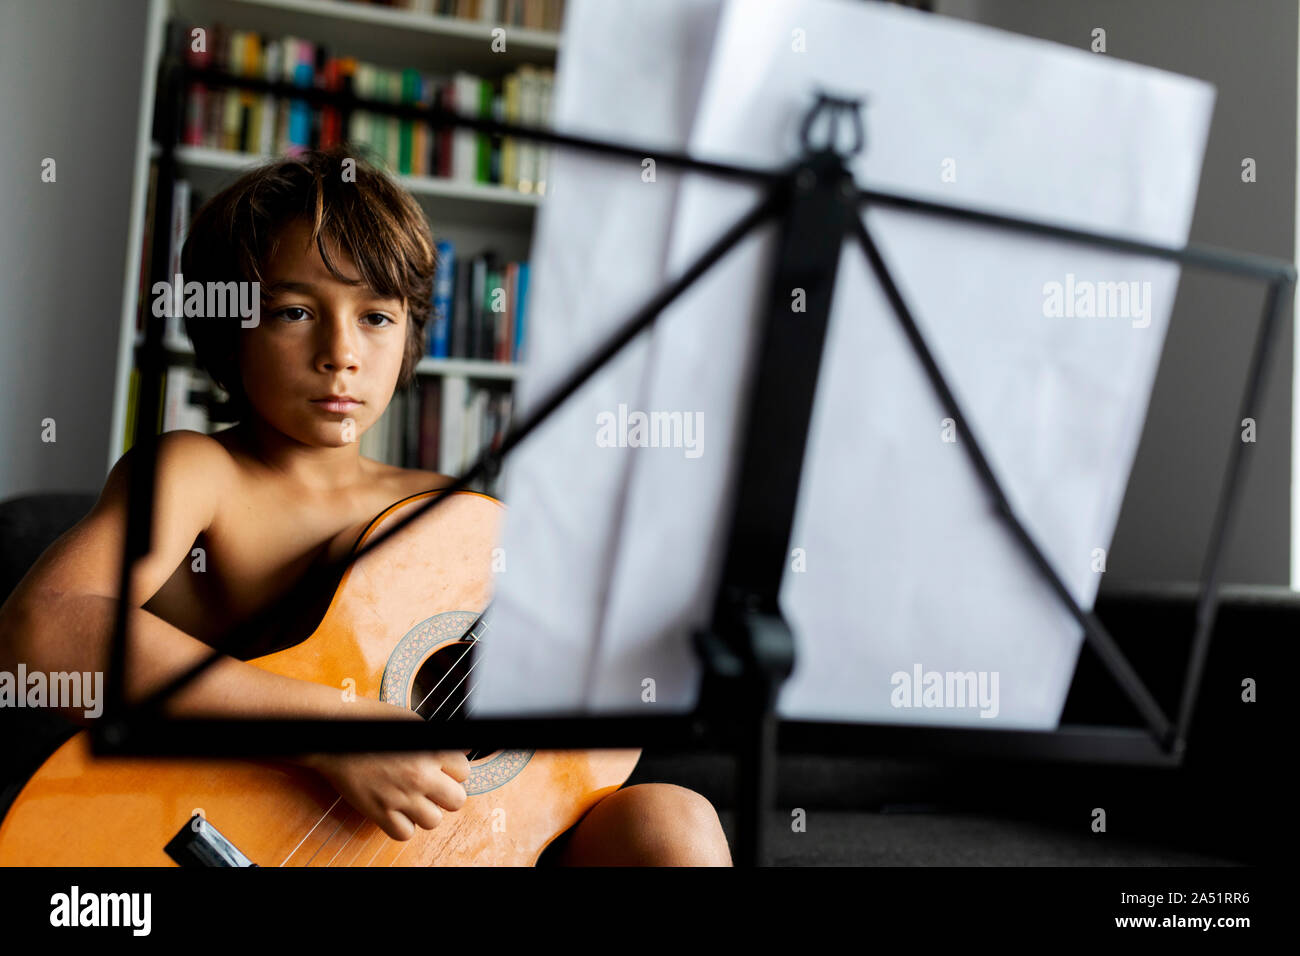 young boy playing guitar in front music stand Stock Photo